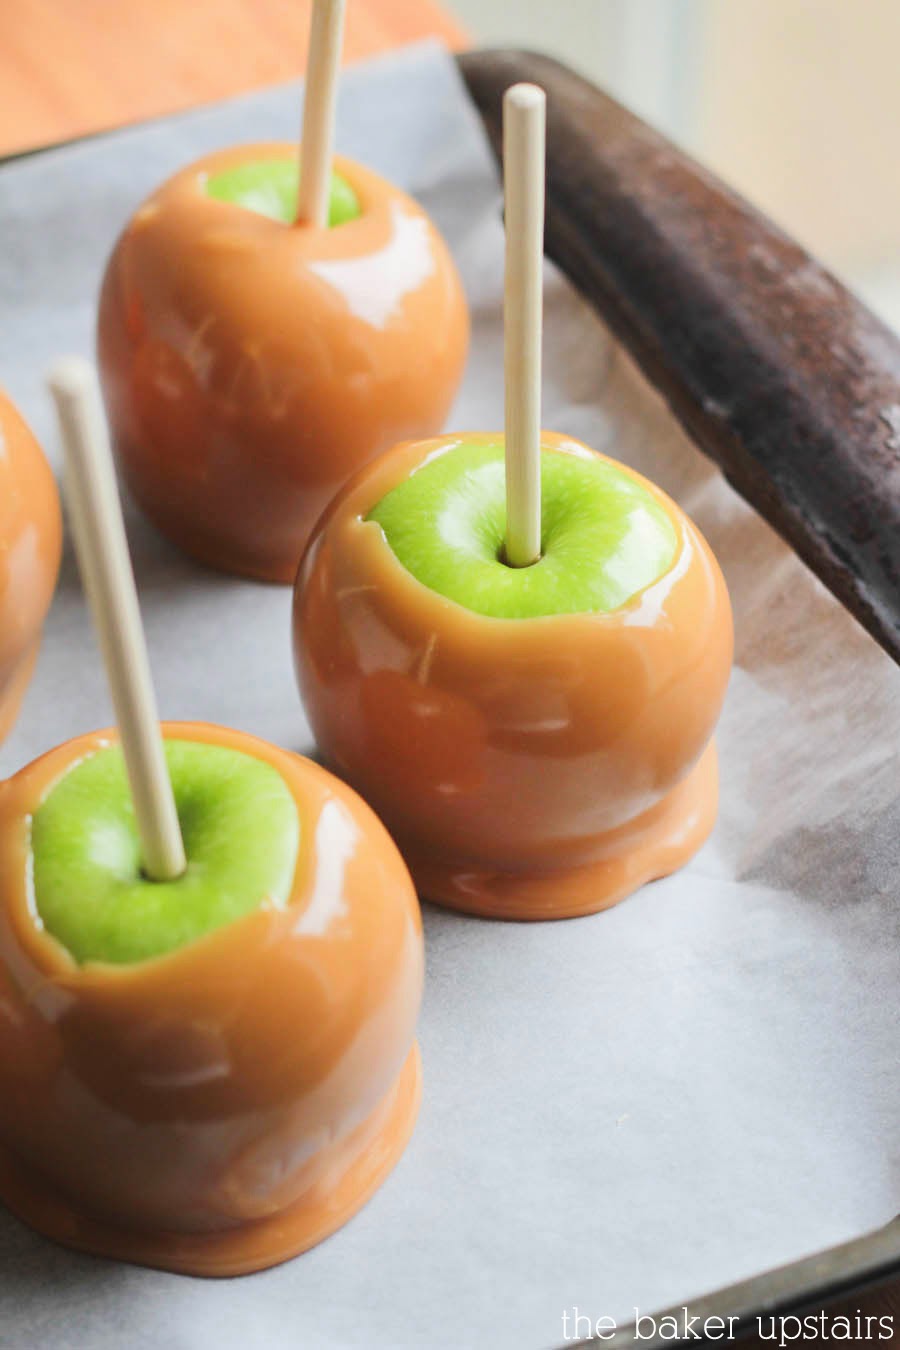 These deliciously sweet caramel apples are covered in an exquisite homemade caramel, then loaded with tasty toppings. They're truly the best!